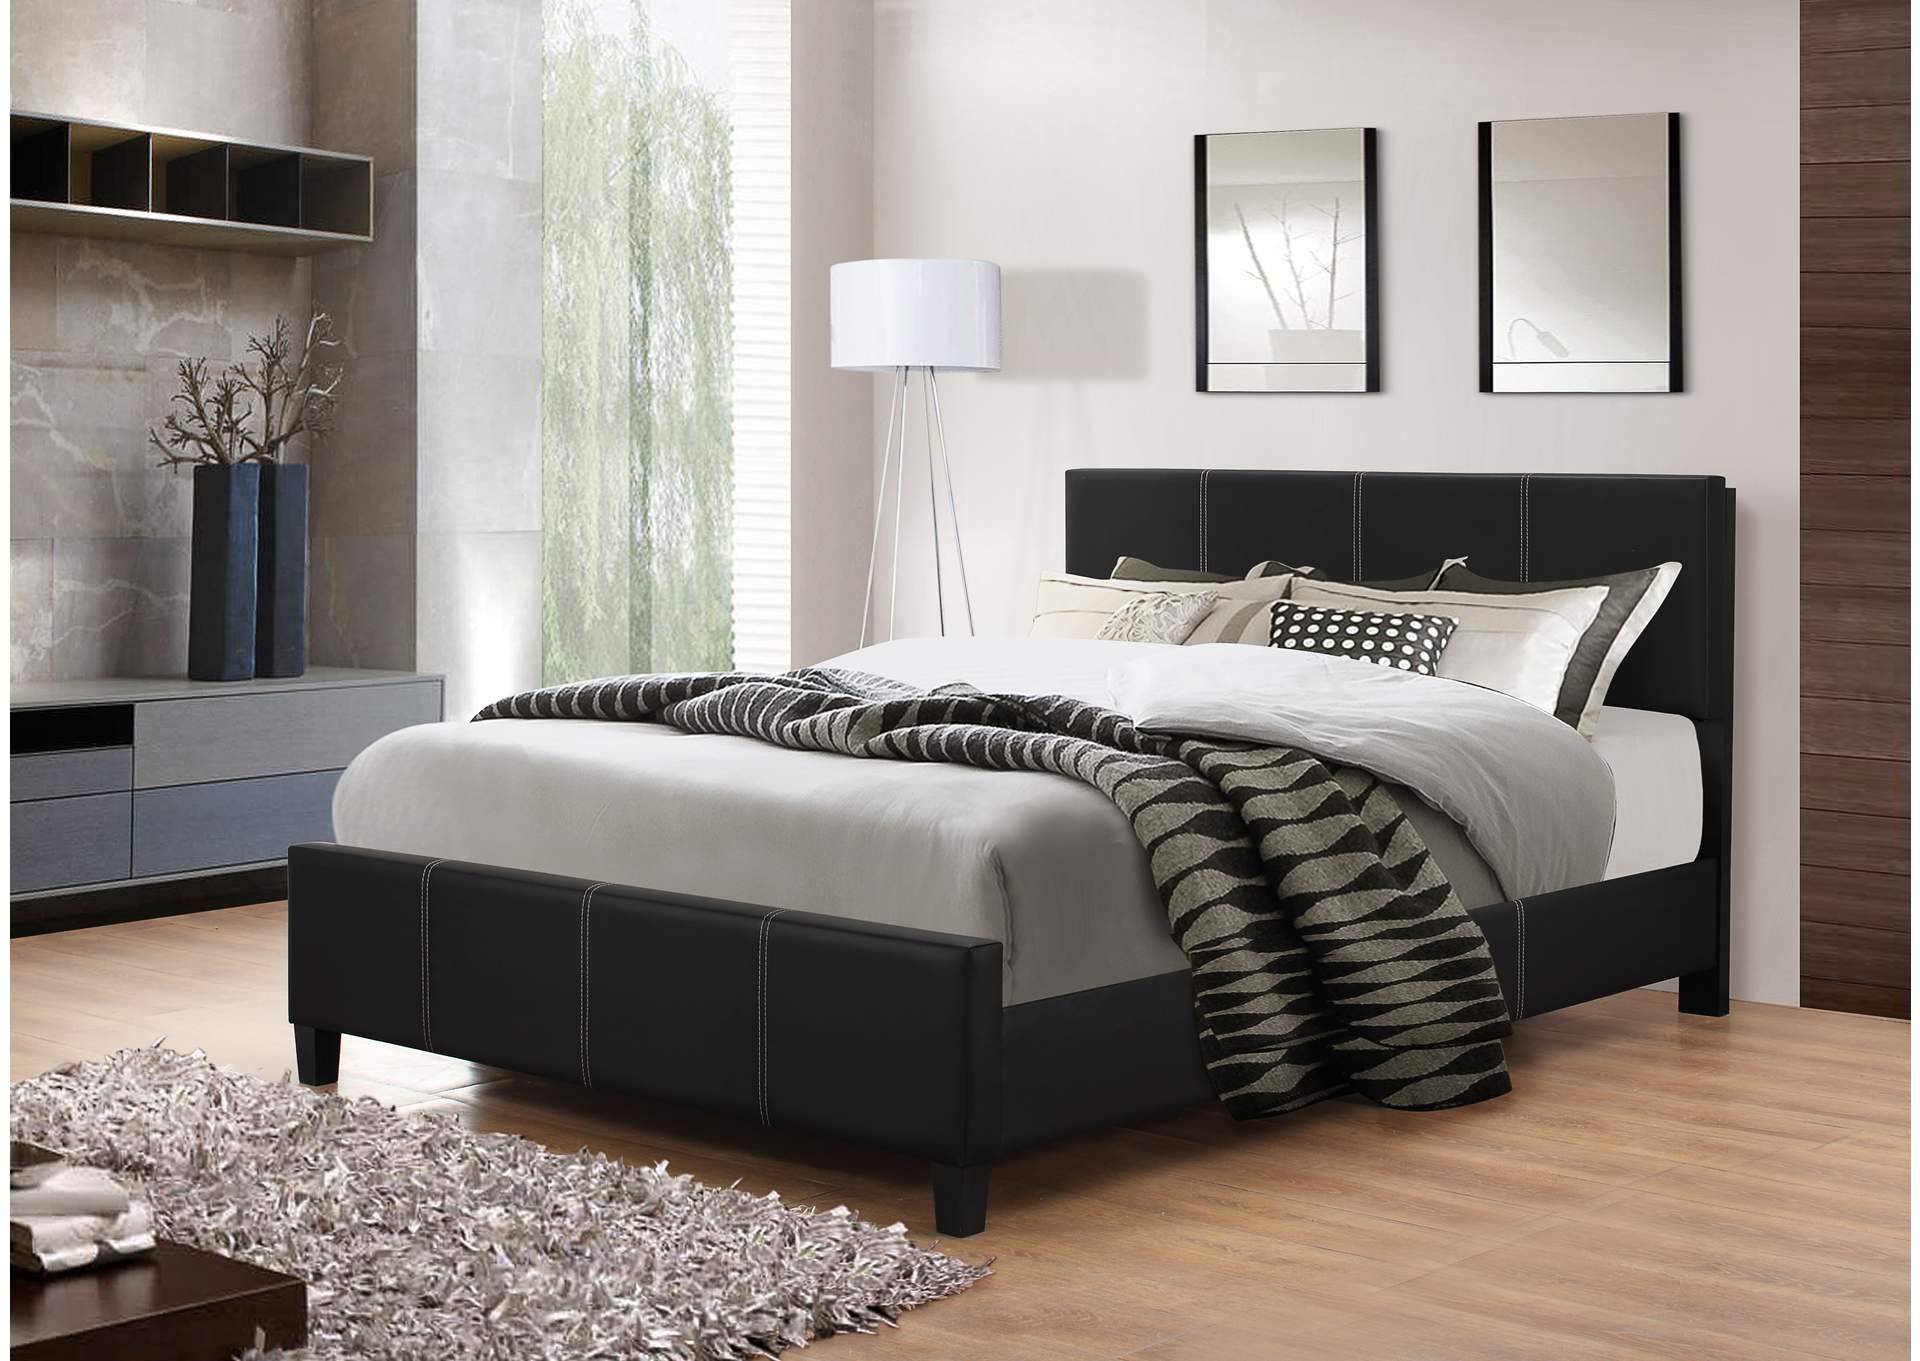 Harlynx Black Twin Bed,Global Trading